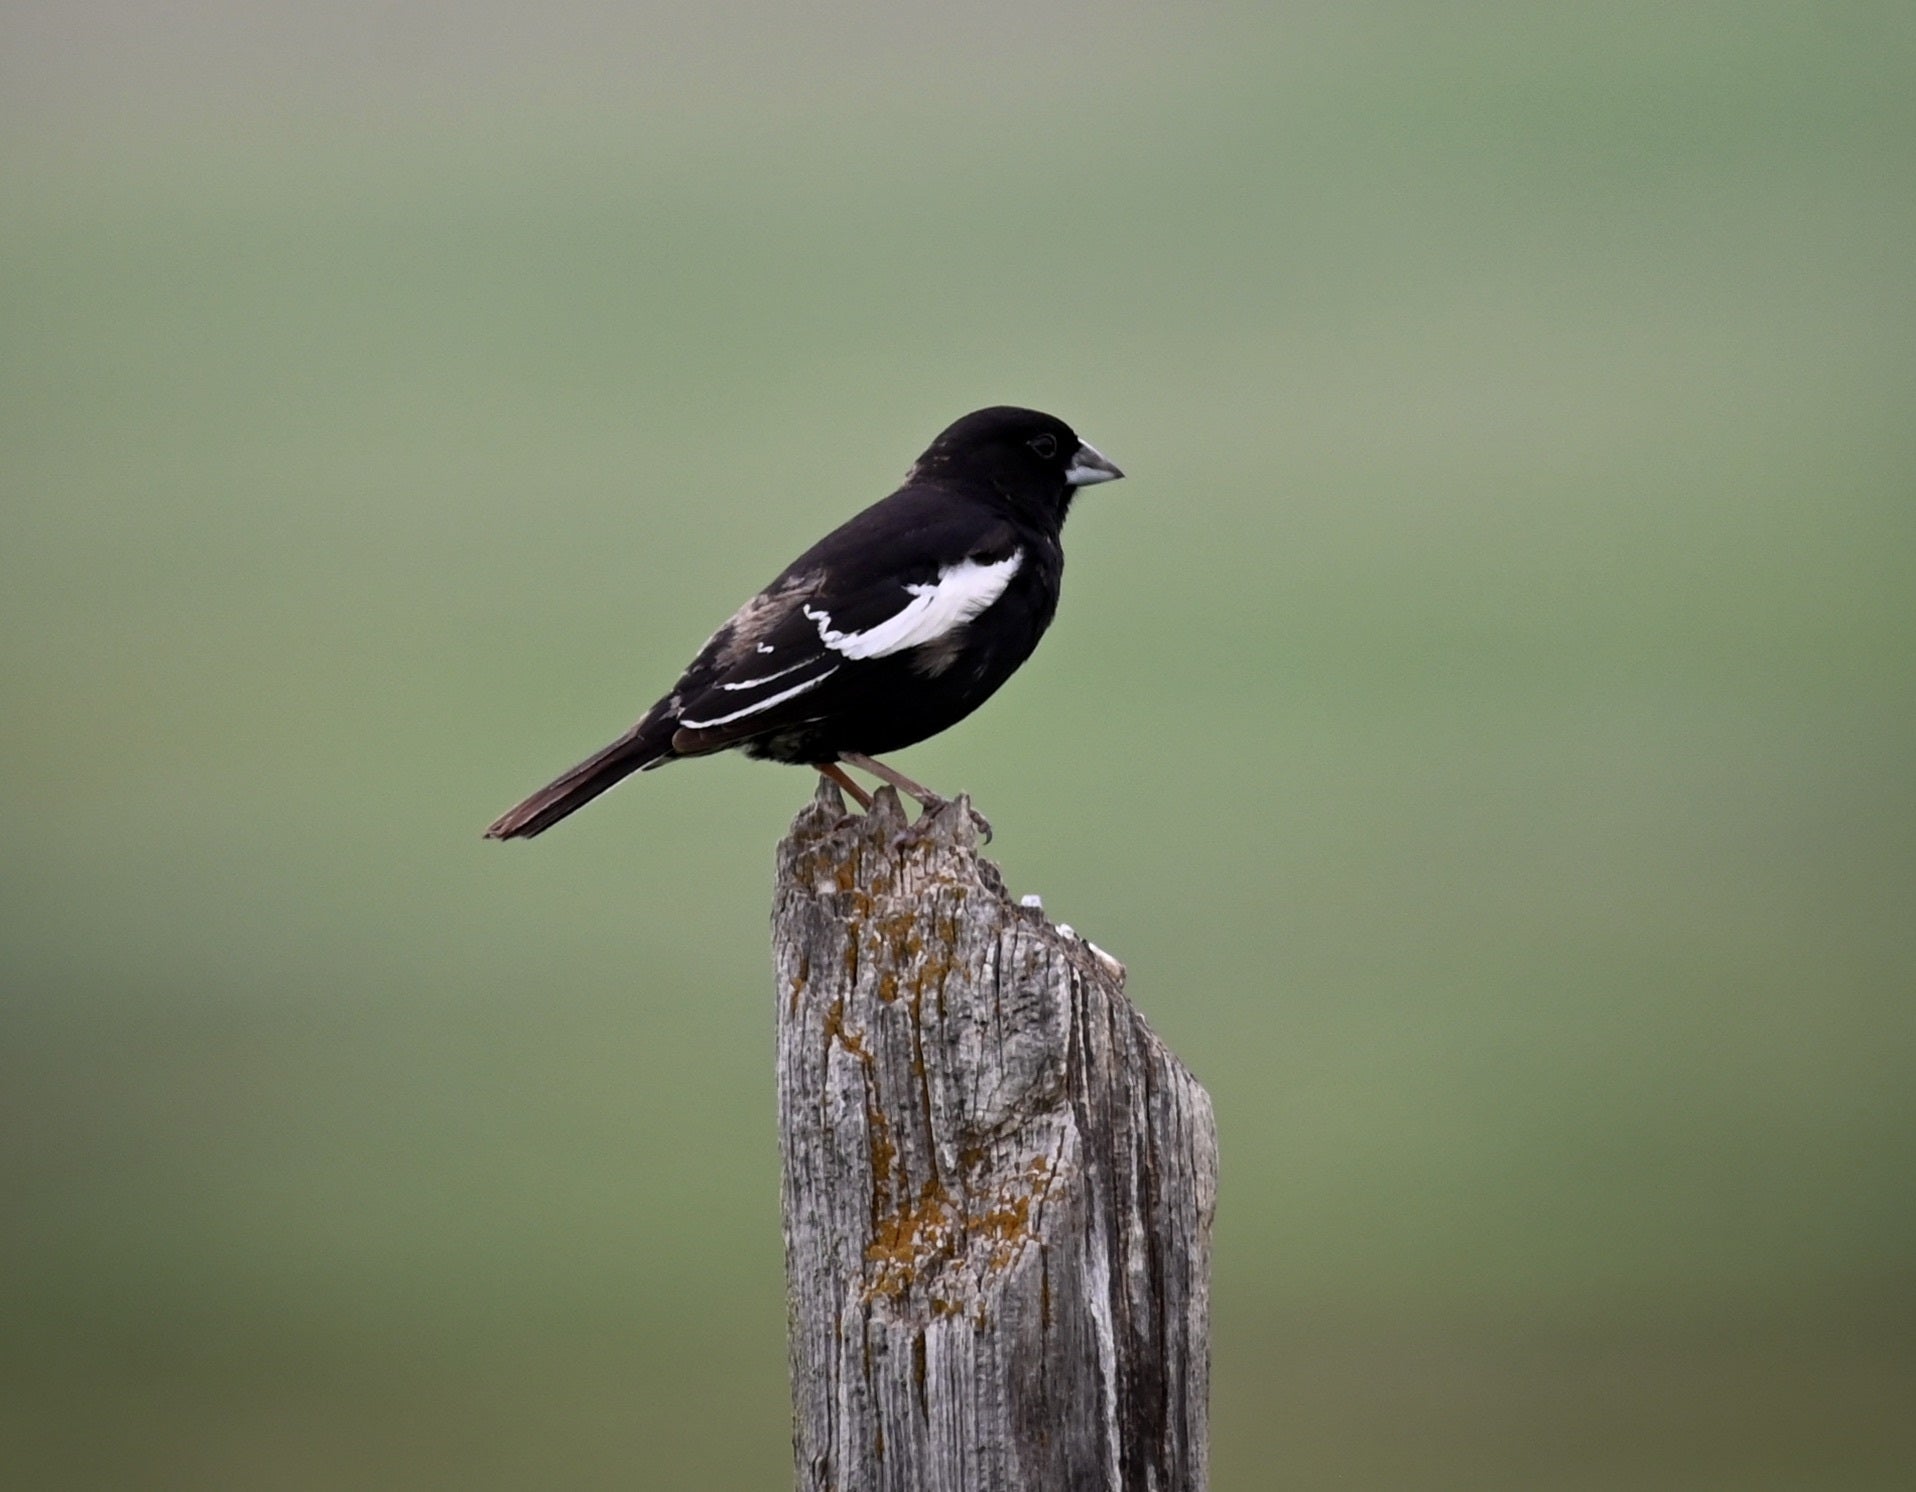 a sharp black bird with white shoulder patch sits on a fence post